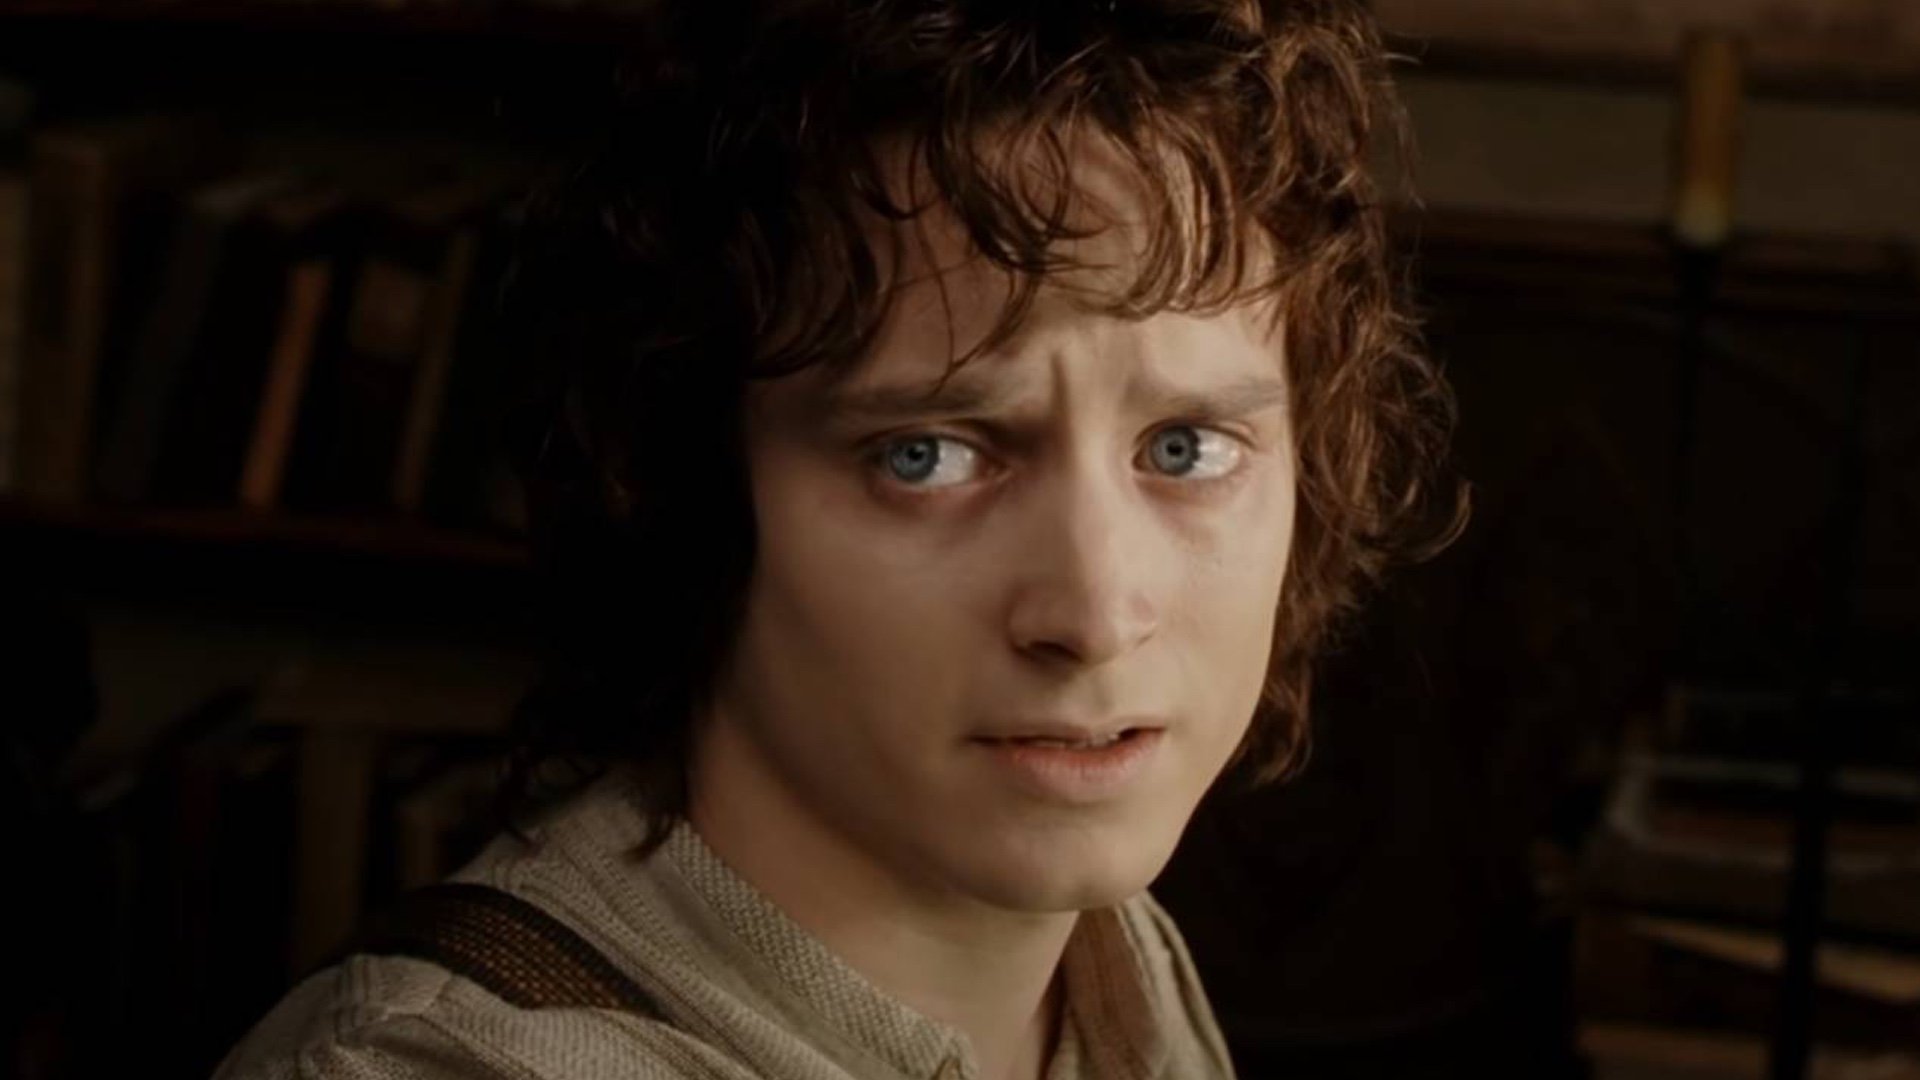 Elijah Wood on New Lord of the Rings Movies: I'm Surprised, Fascinated